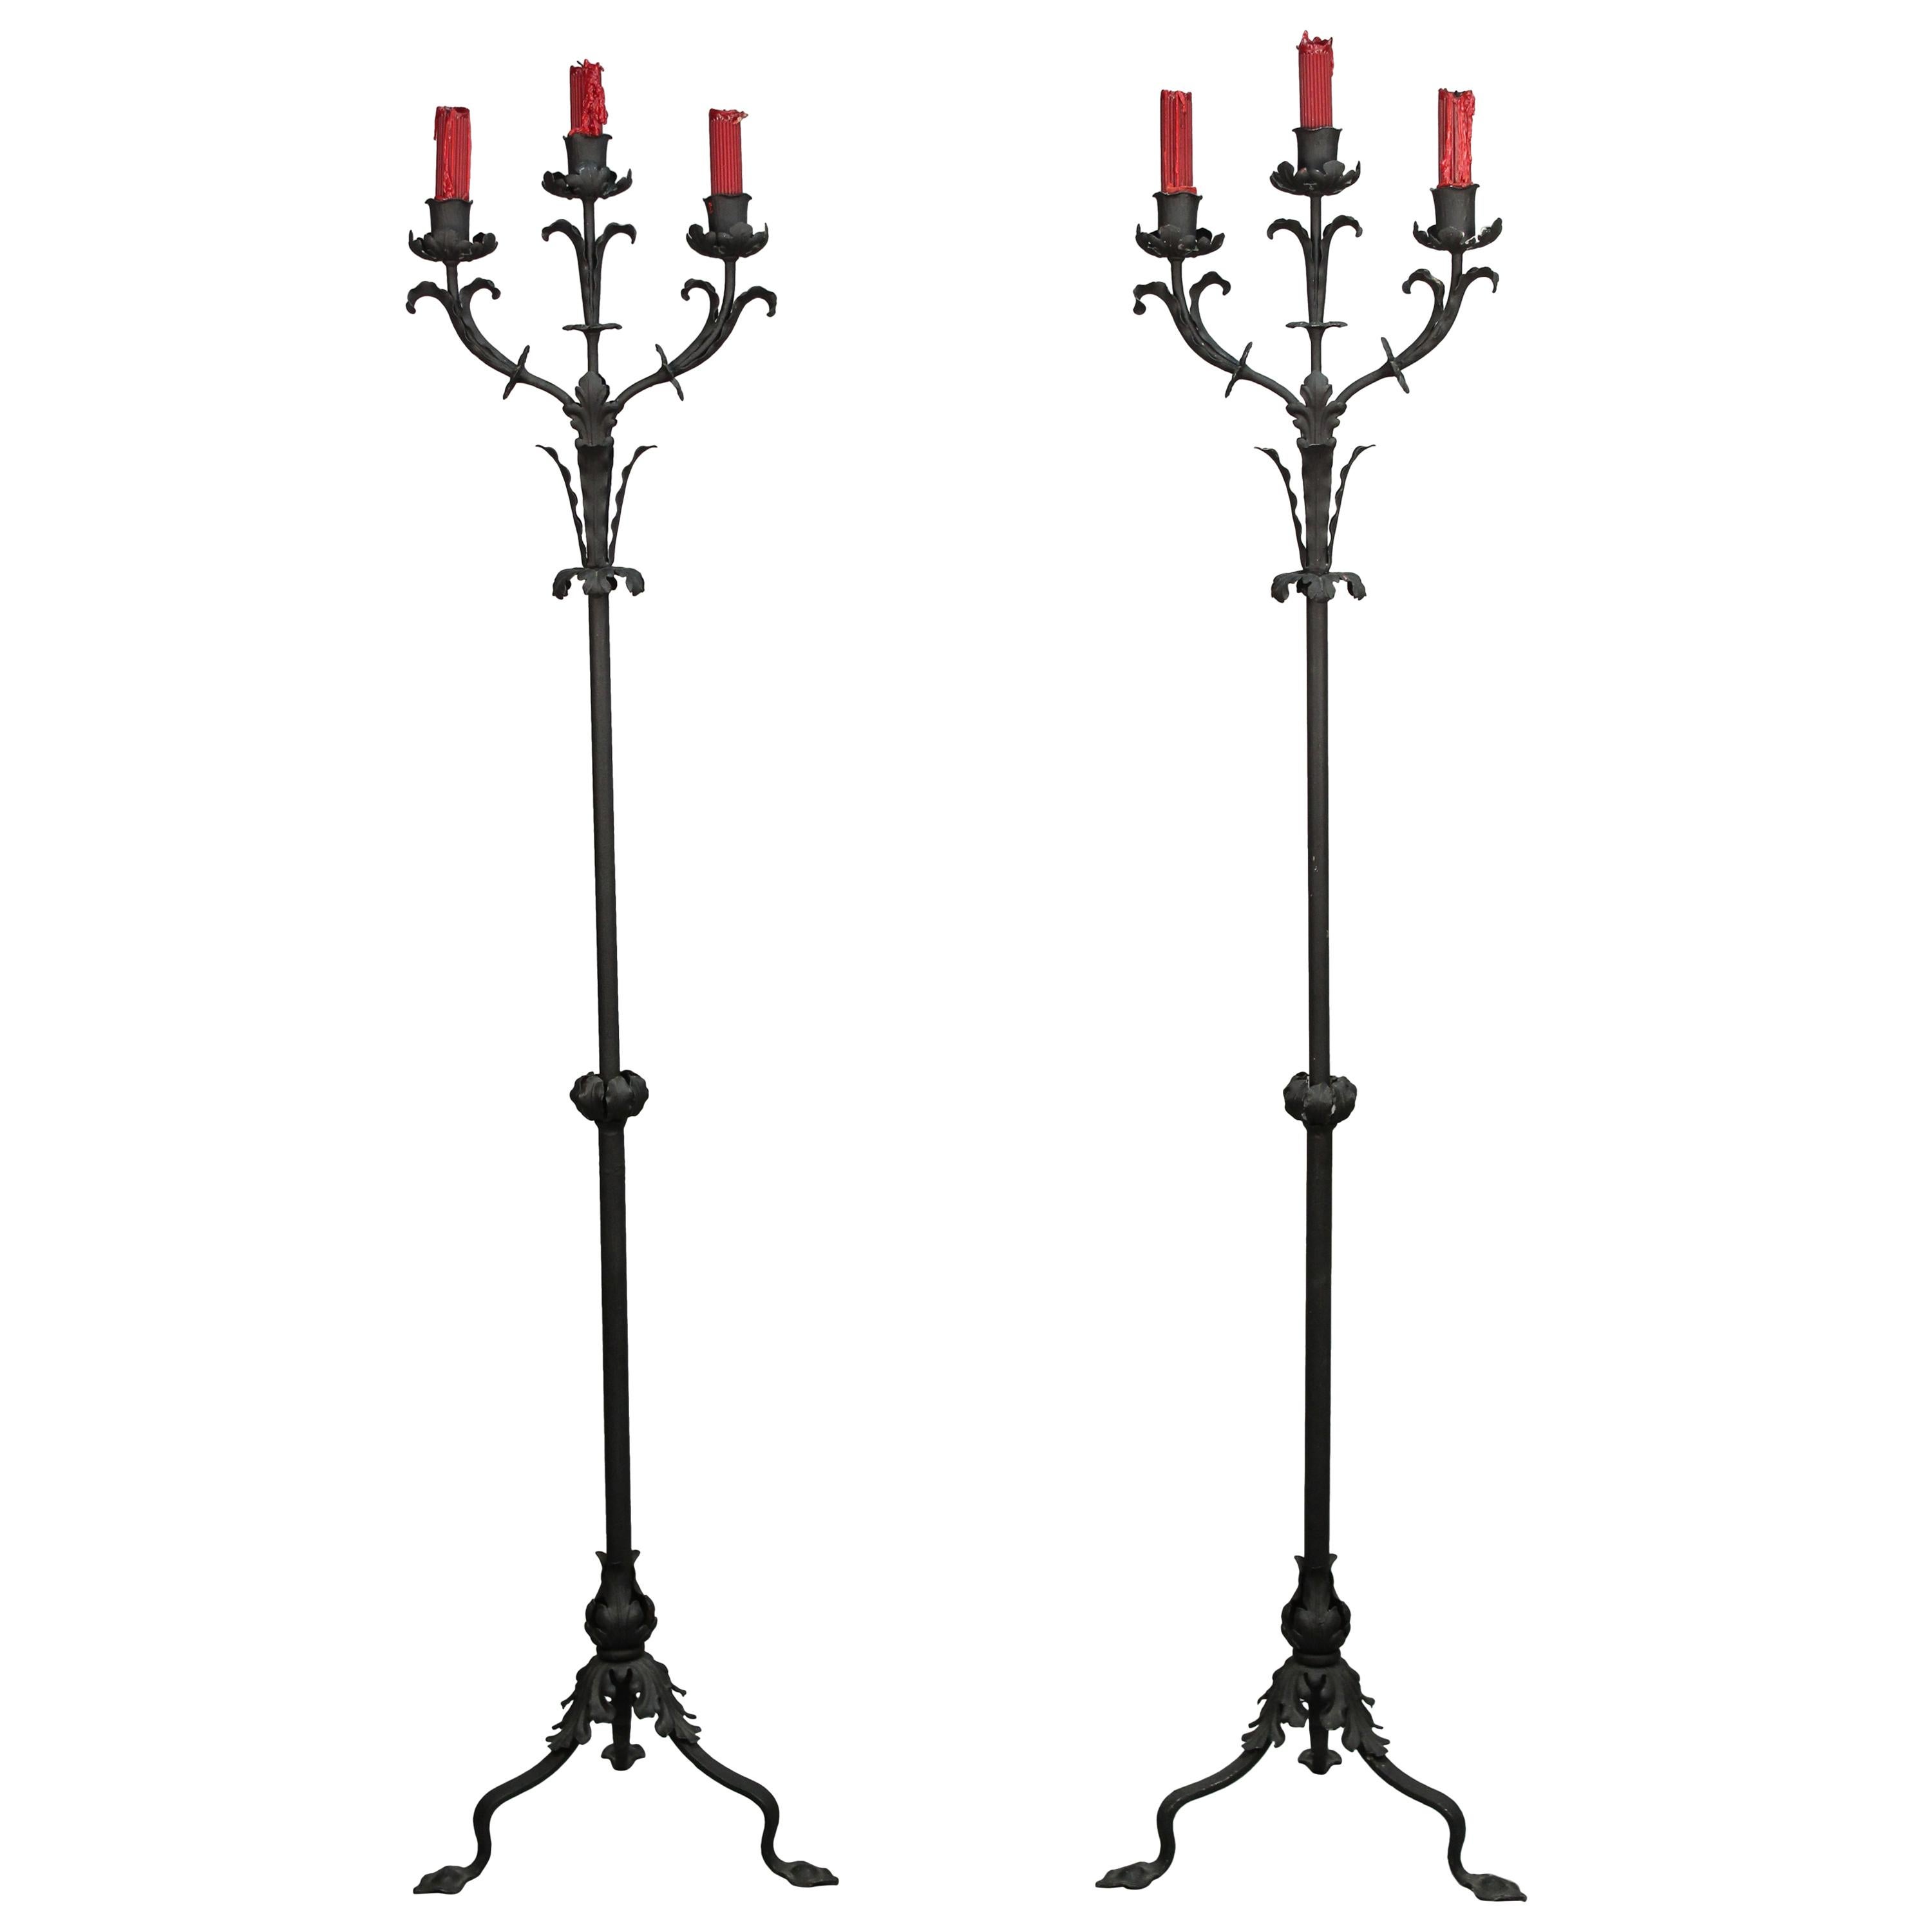 Pair of Tall Wrought Iron Candleholders Fits Nicely with Spanish Revival Tudor